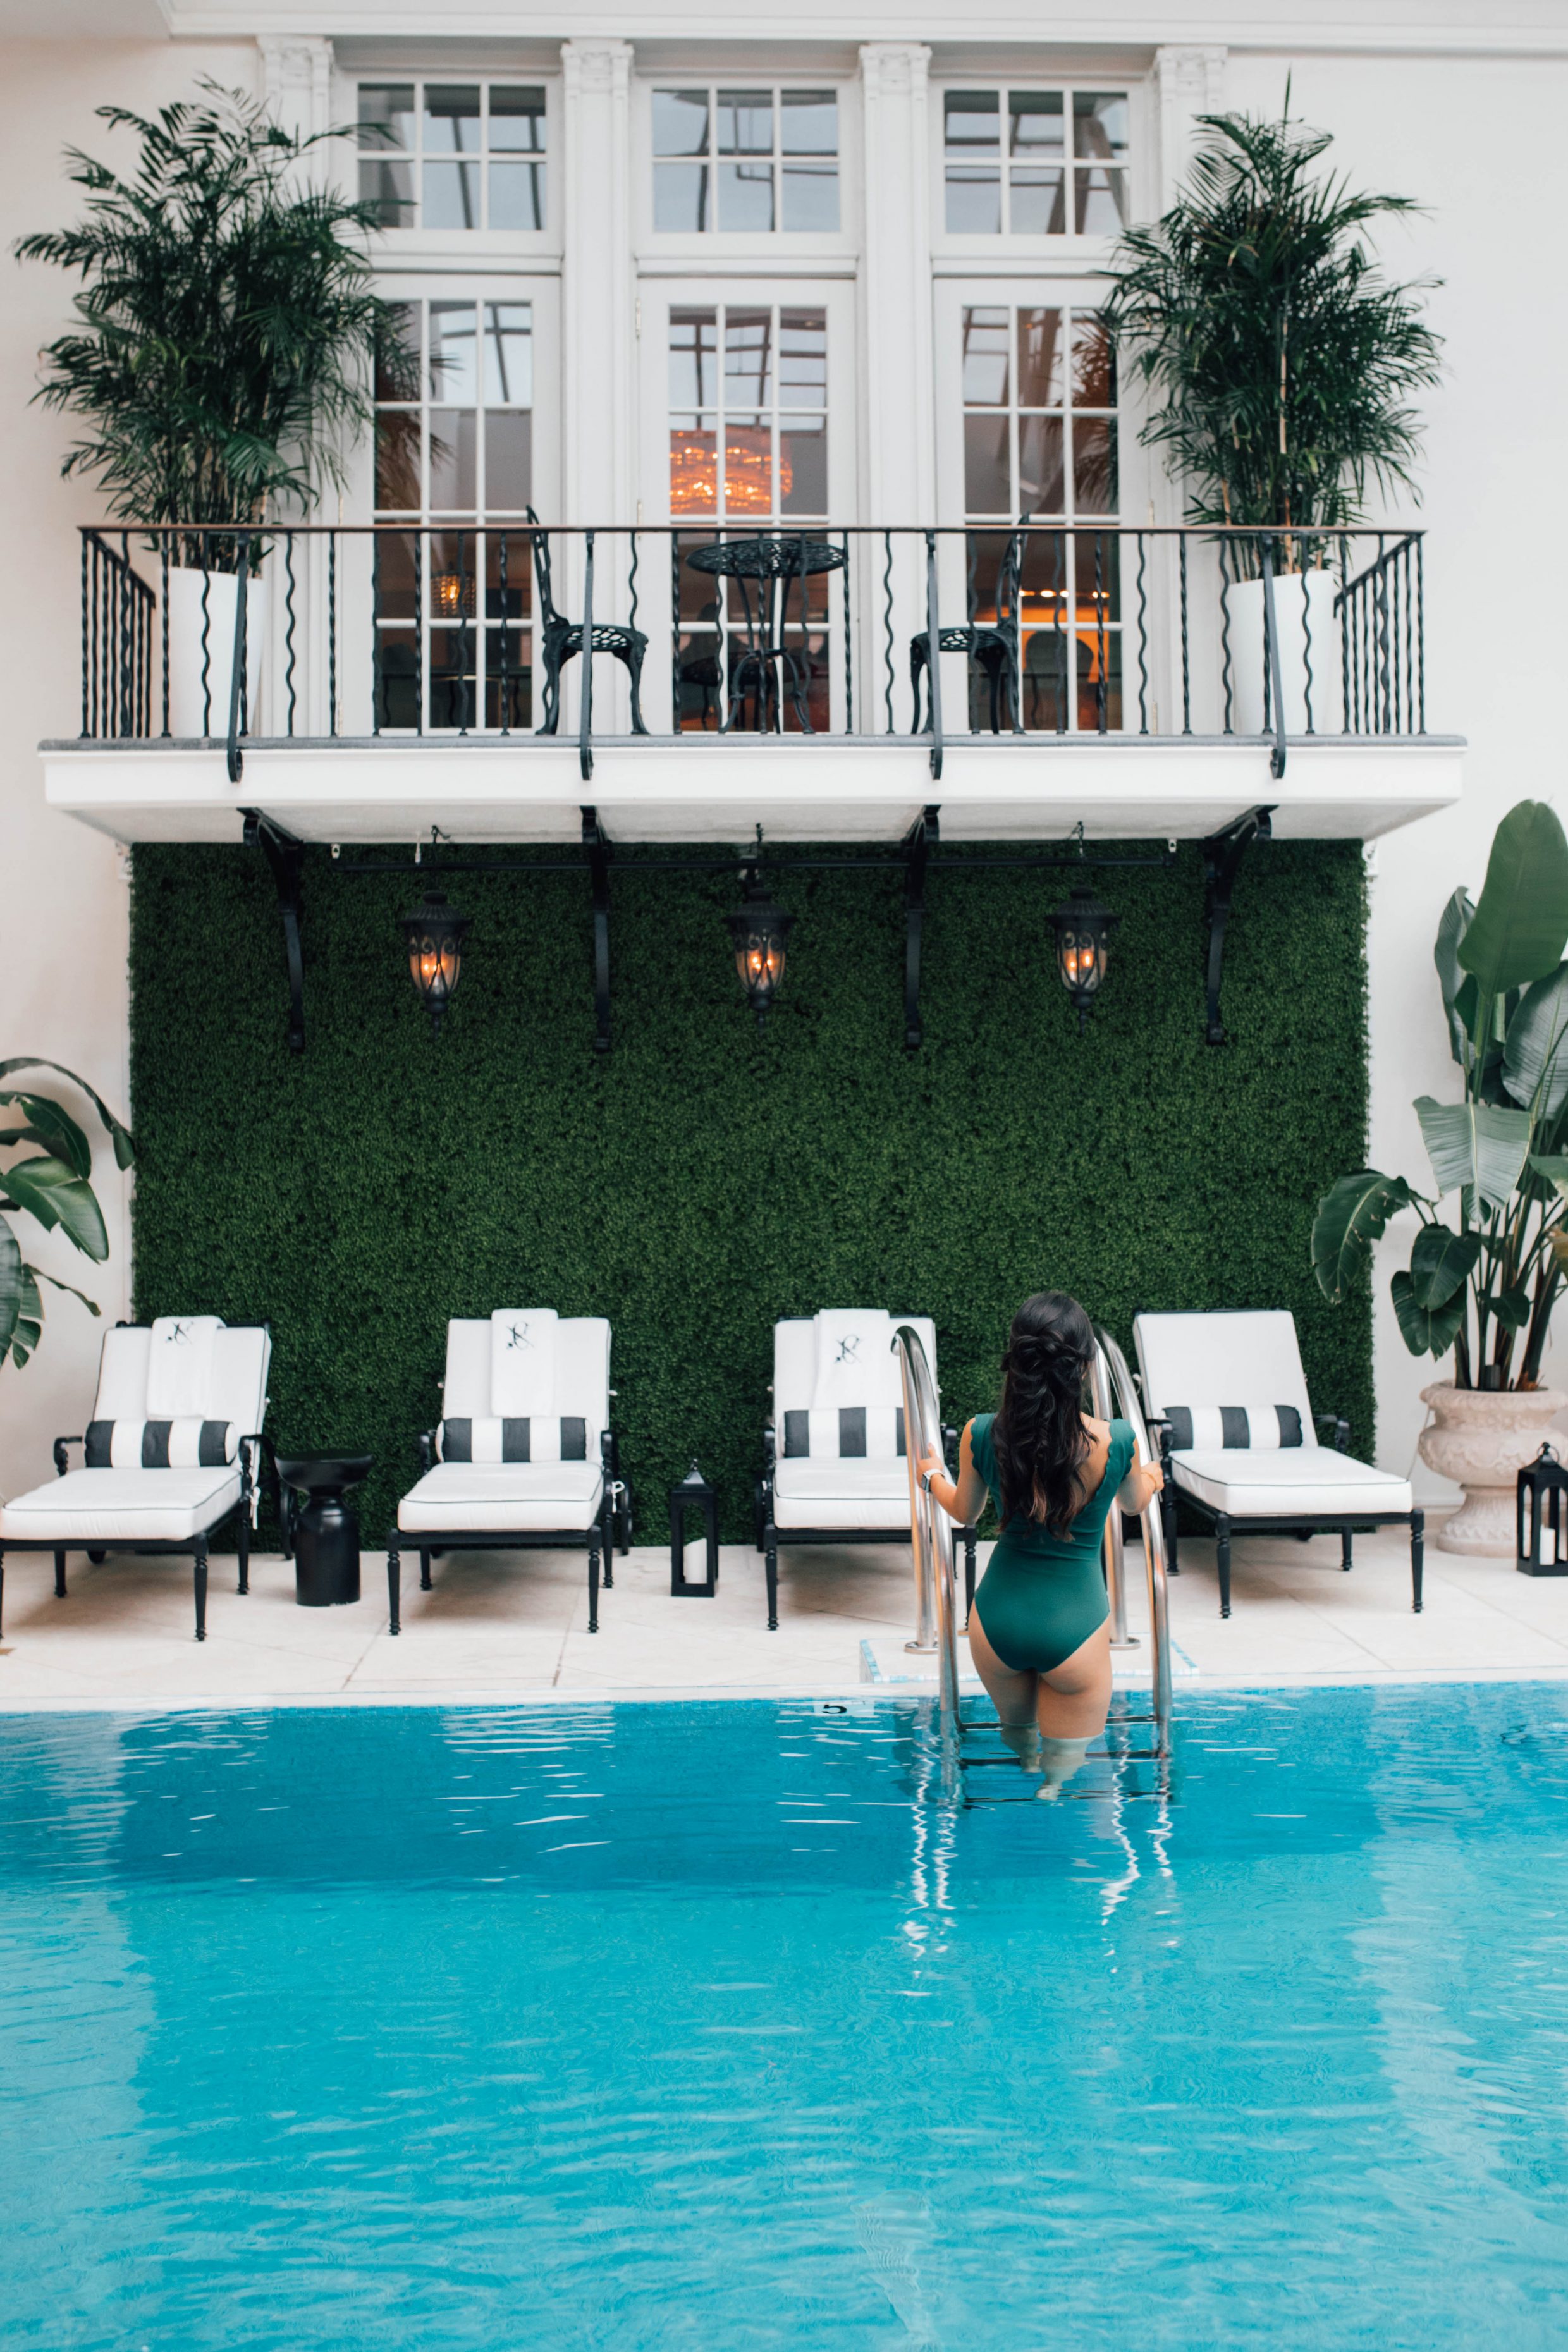 Blogger Hoang-Kim in the pool at The Cavalier Hotel